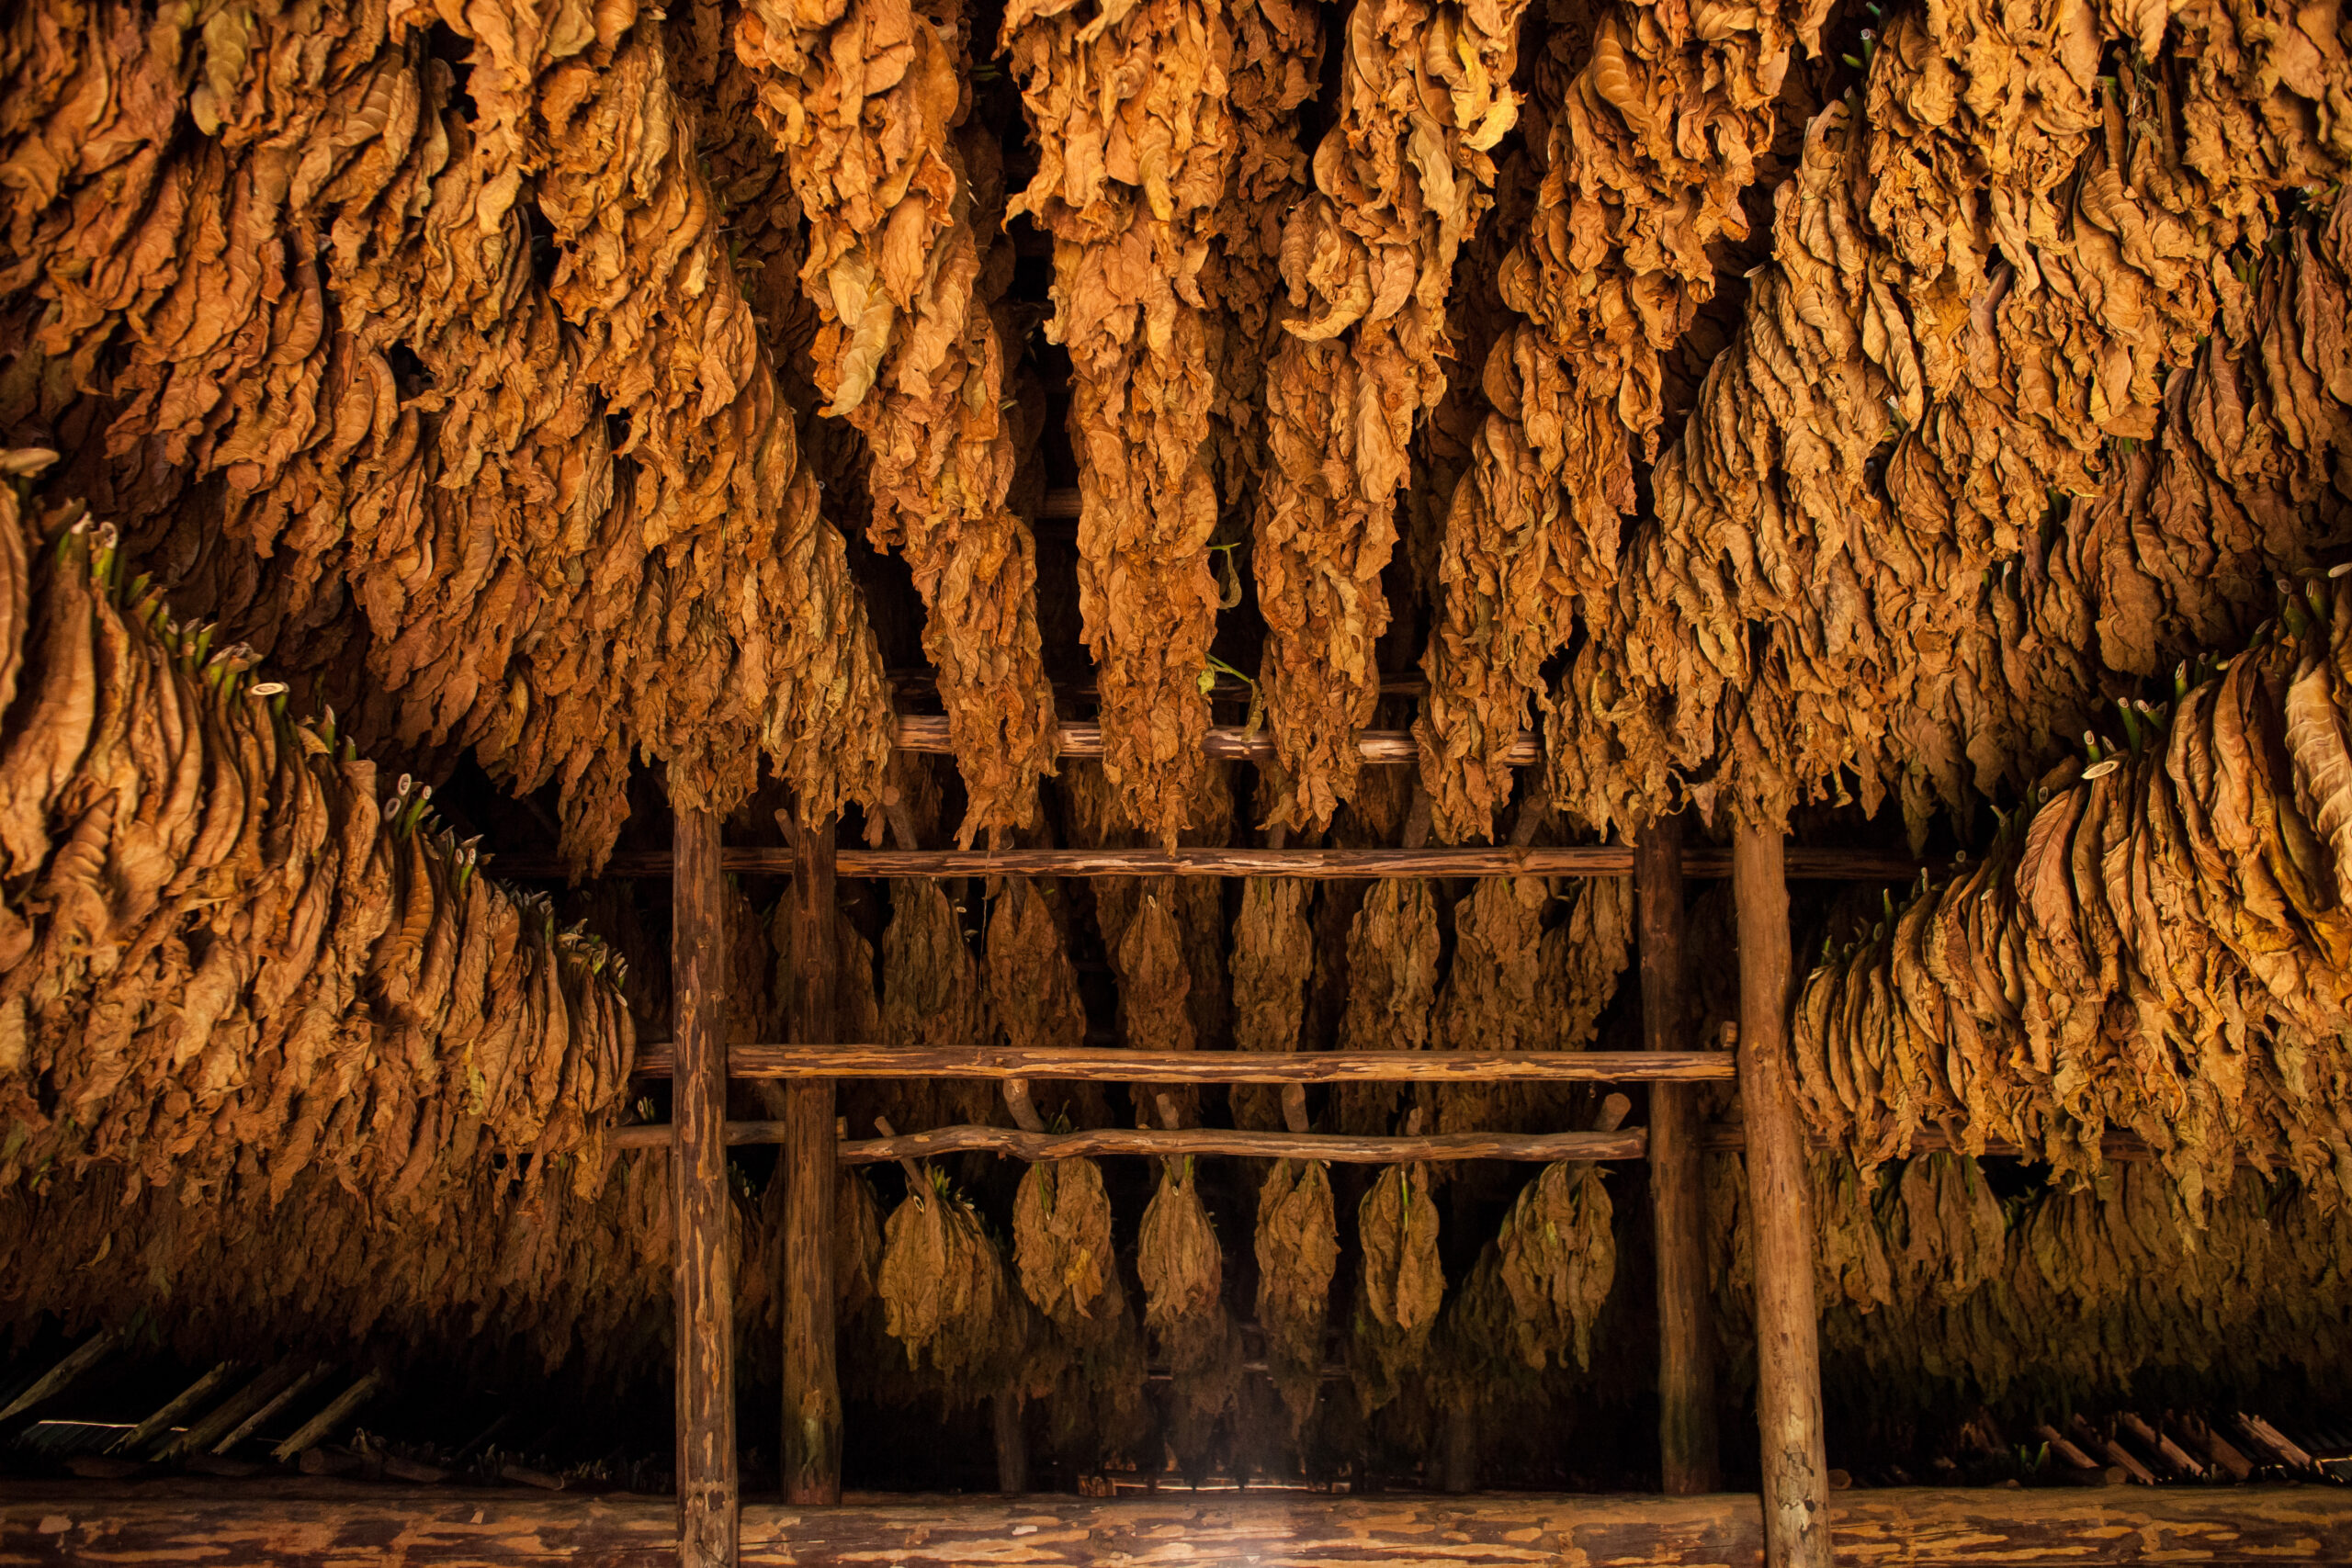 Drying tobacco for cigars